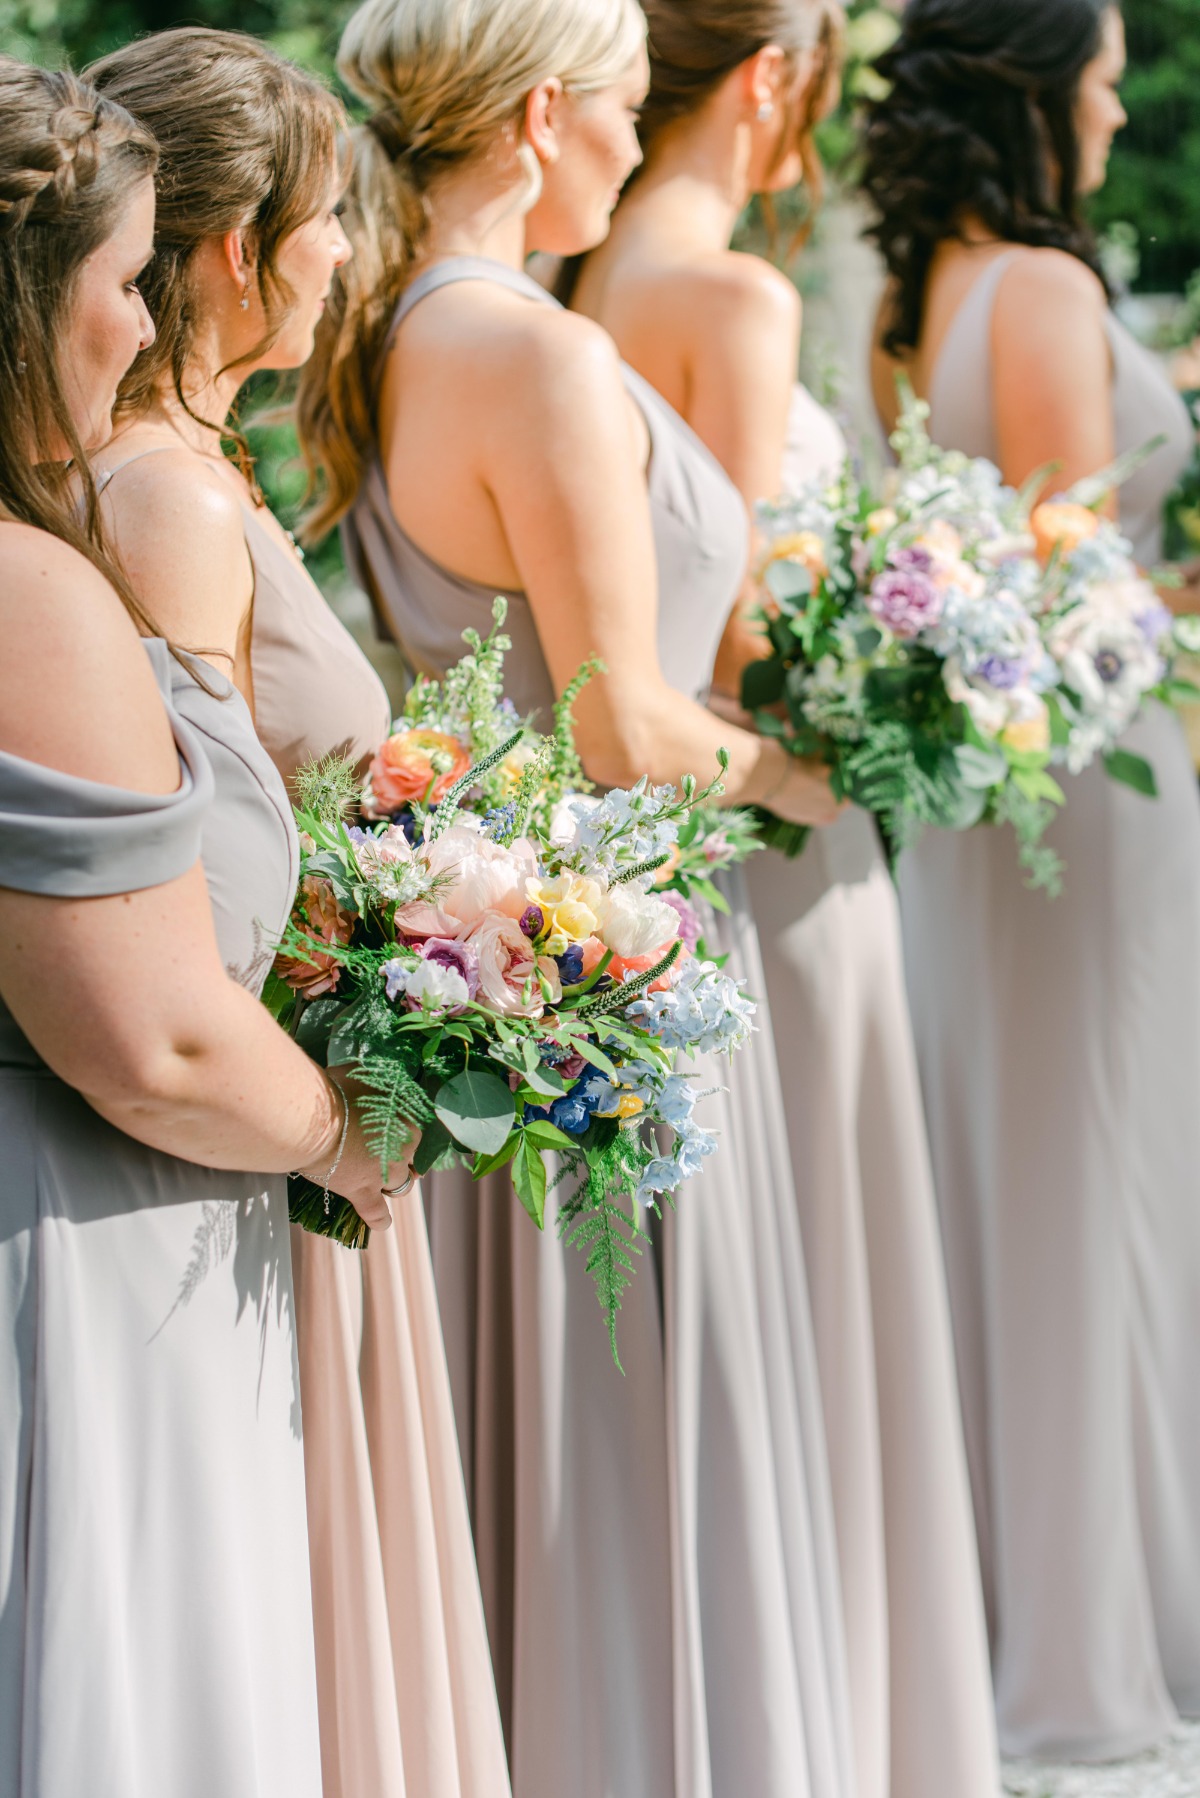 Row of bridesmaids in neutral dresses holding bouquets at altar